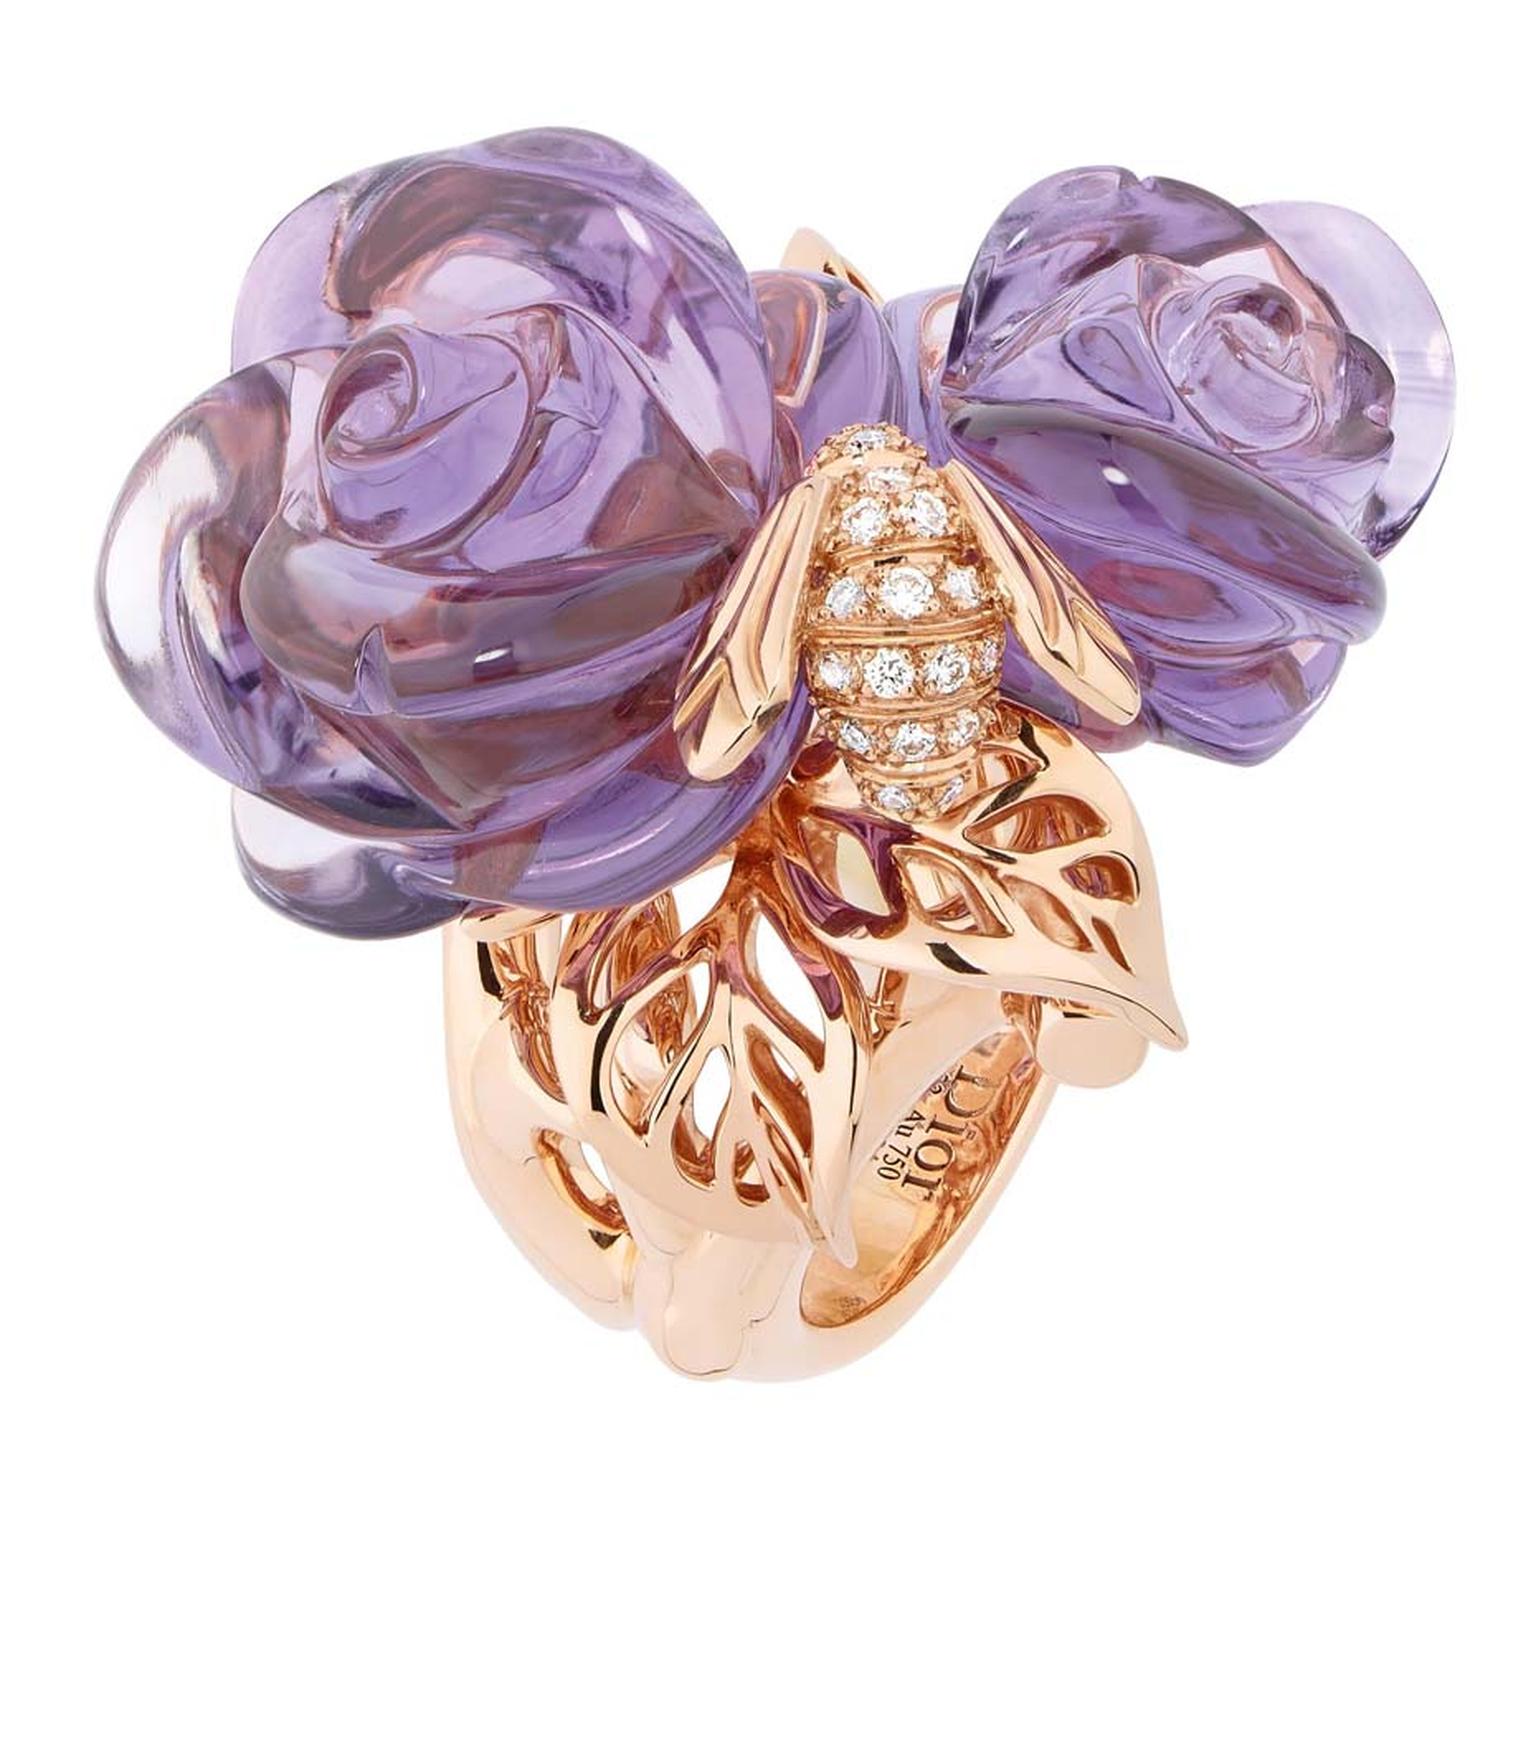 Bee-inspired Pré Catelan ring in pink gold with diamonds and amethyst by Dior Joaillerie.